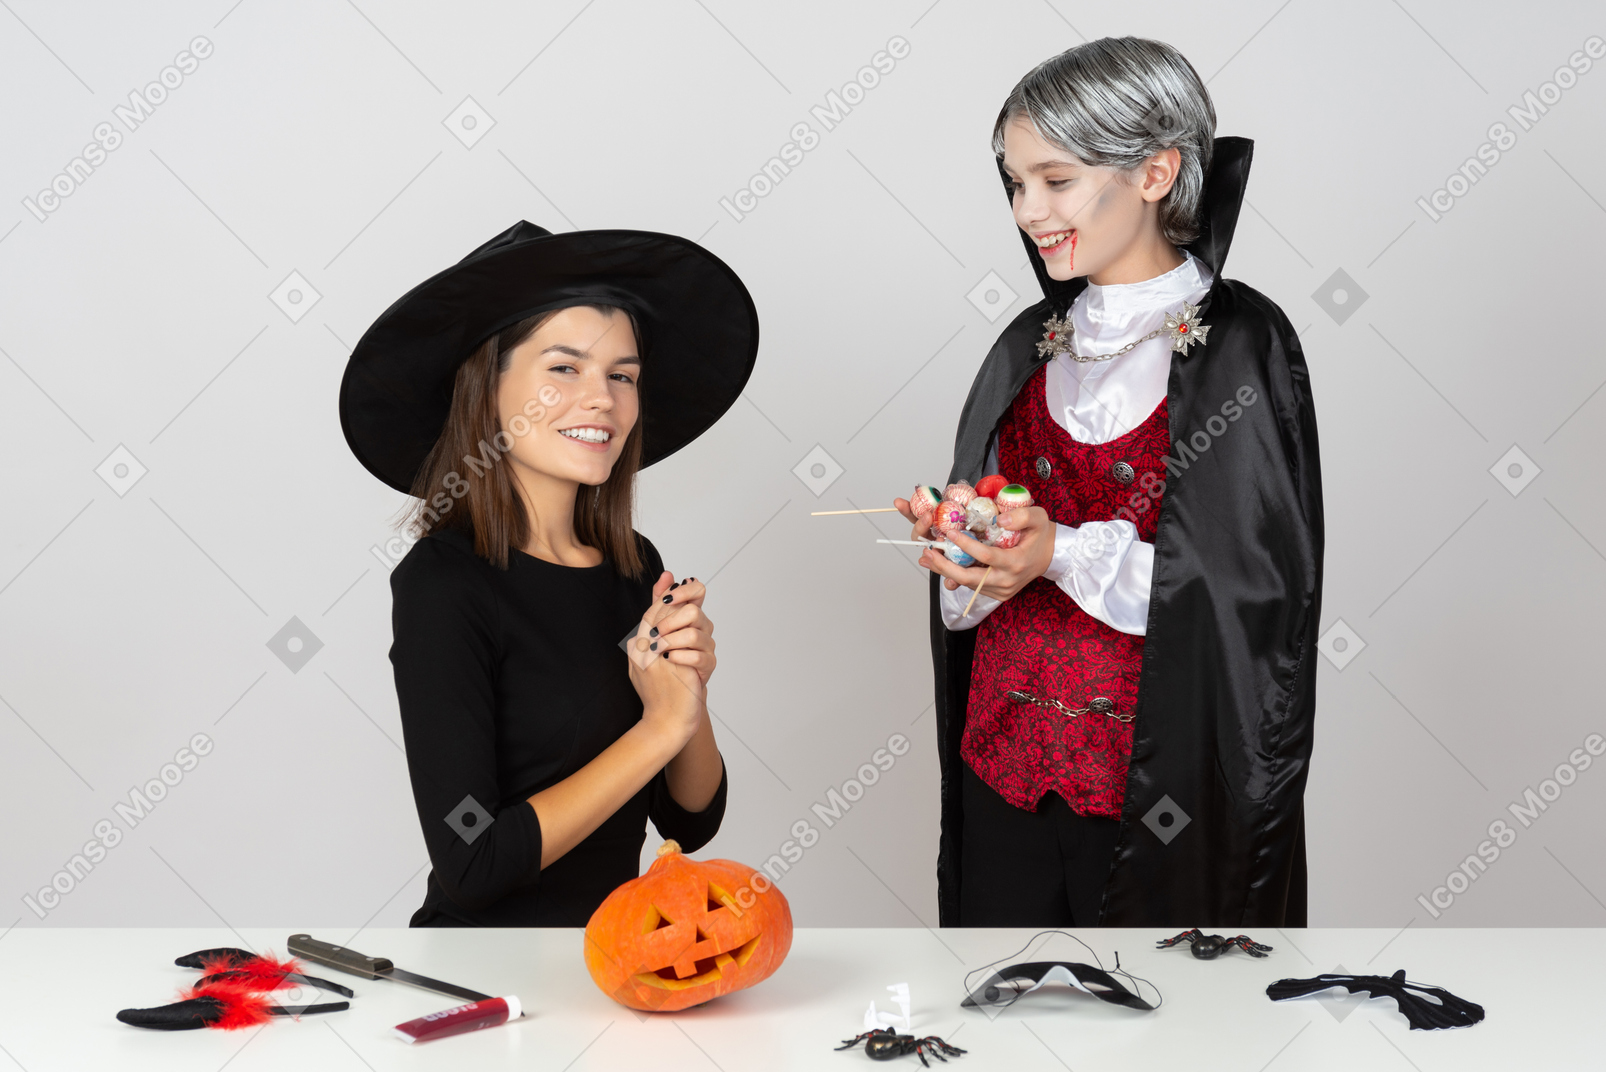 Boy in vampire costume showing candies to his mom in cat costume